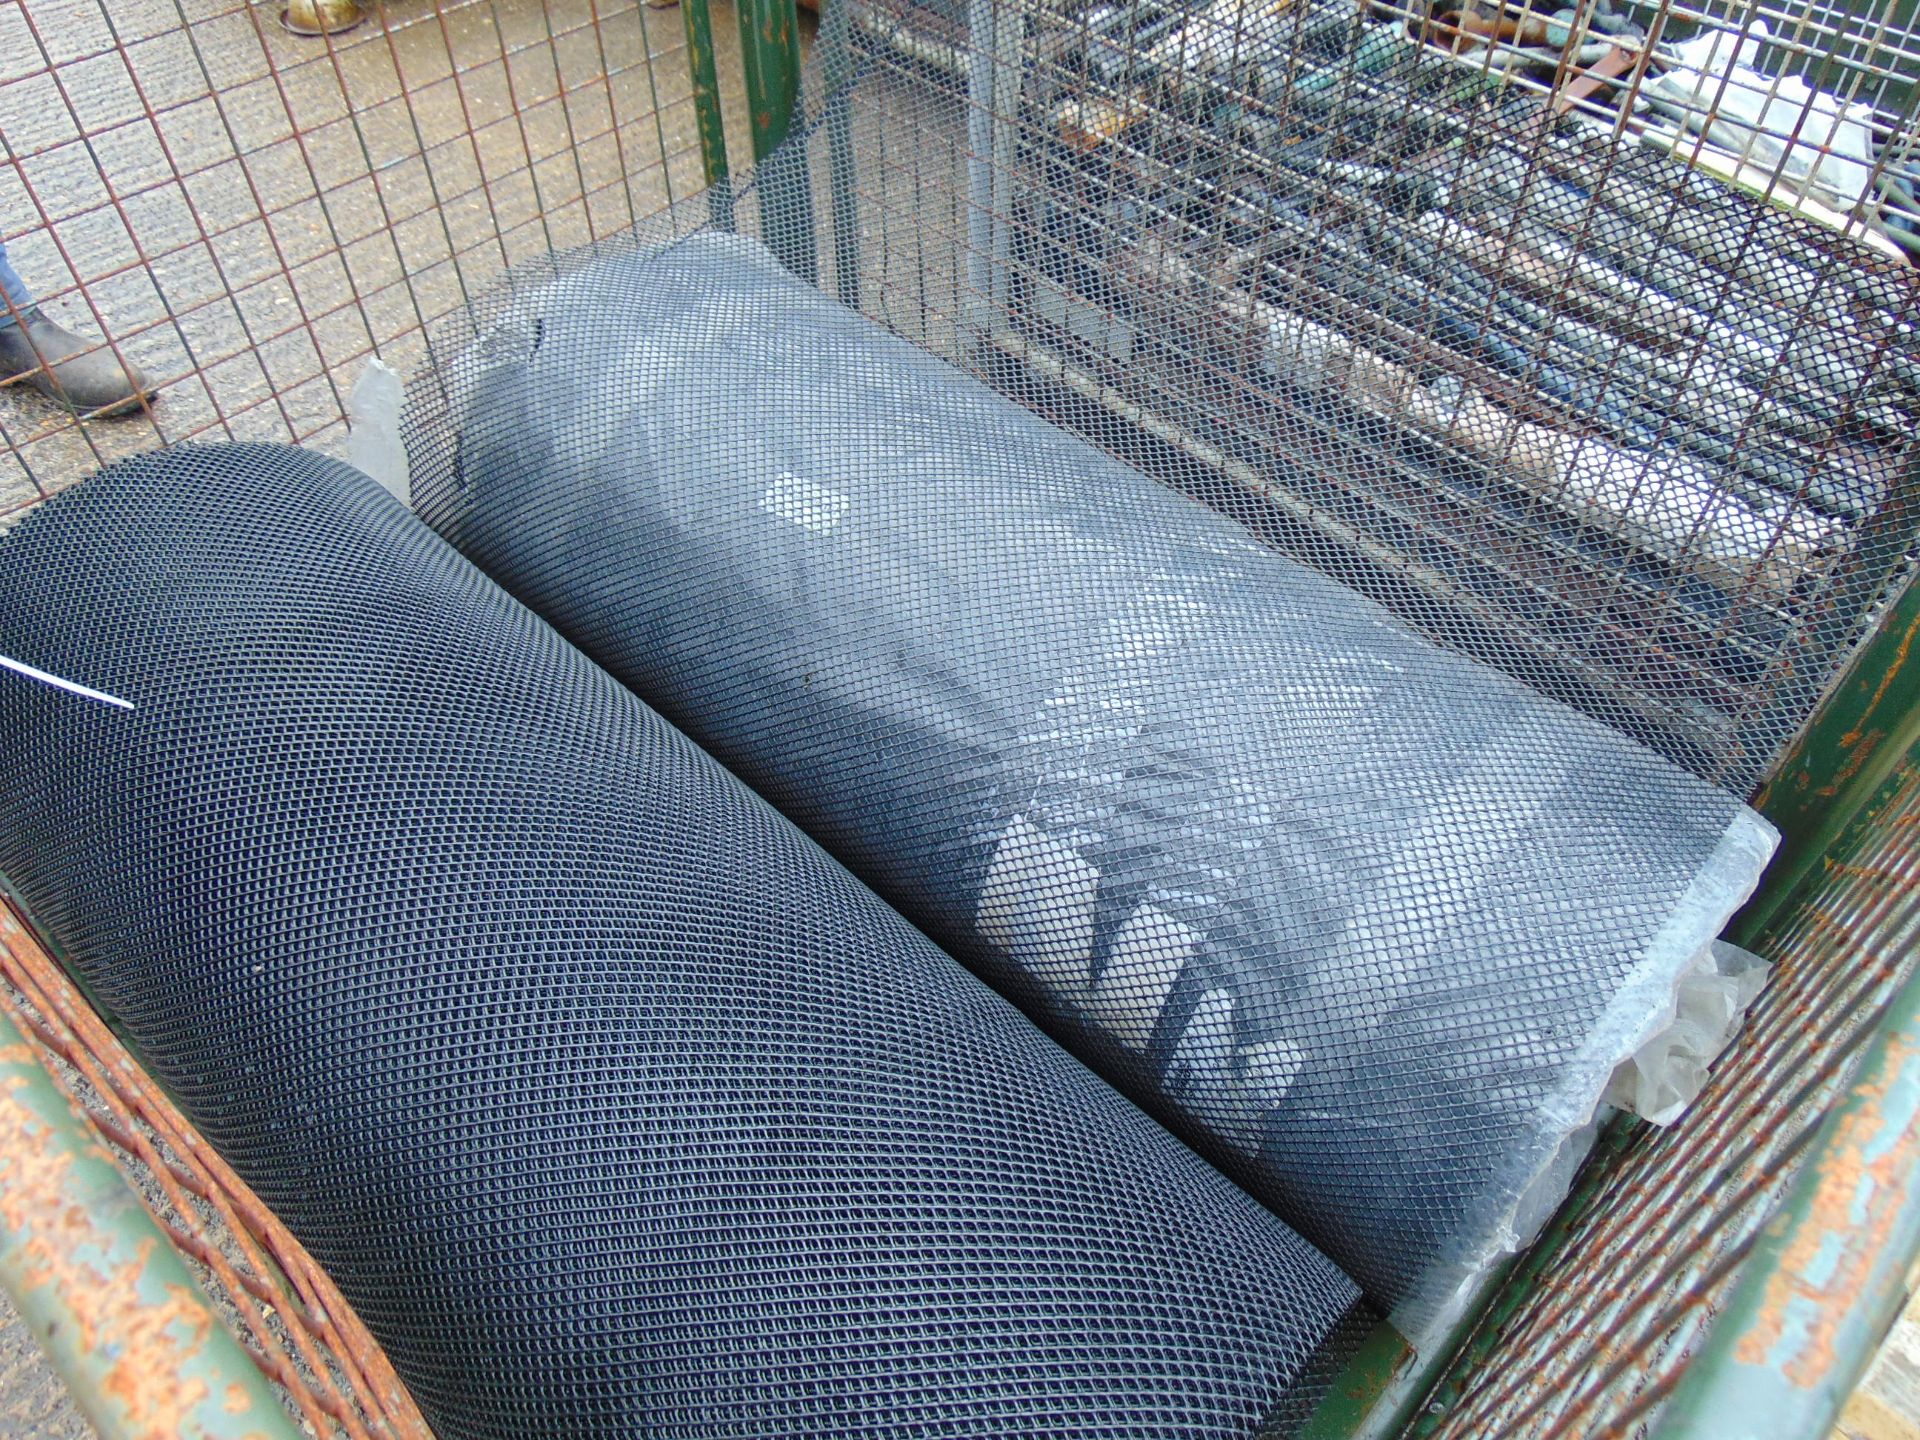 2 x New Unissued Rolls of Plastic Netting Approx 100m + 1m - Image 6 of 6